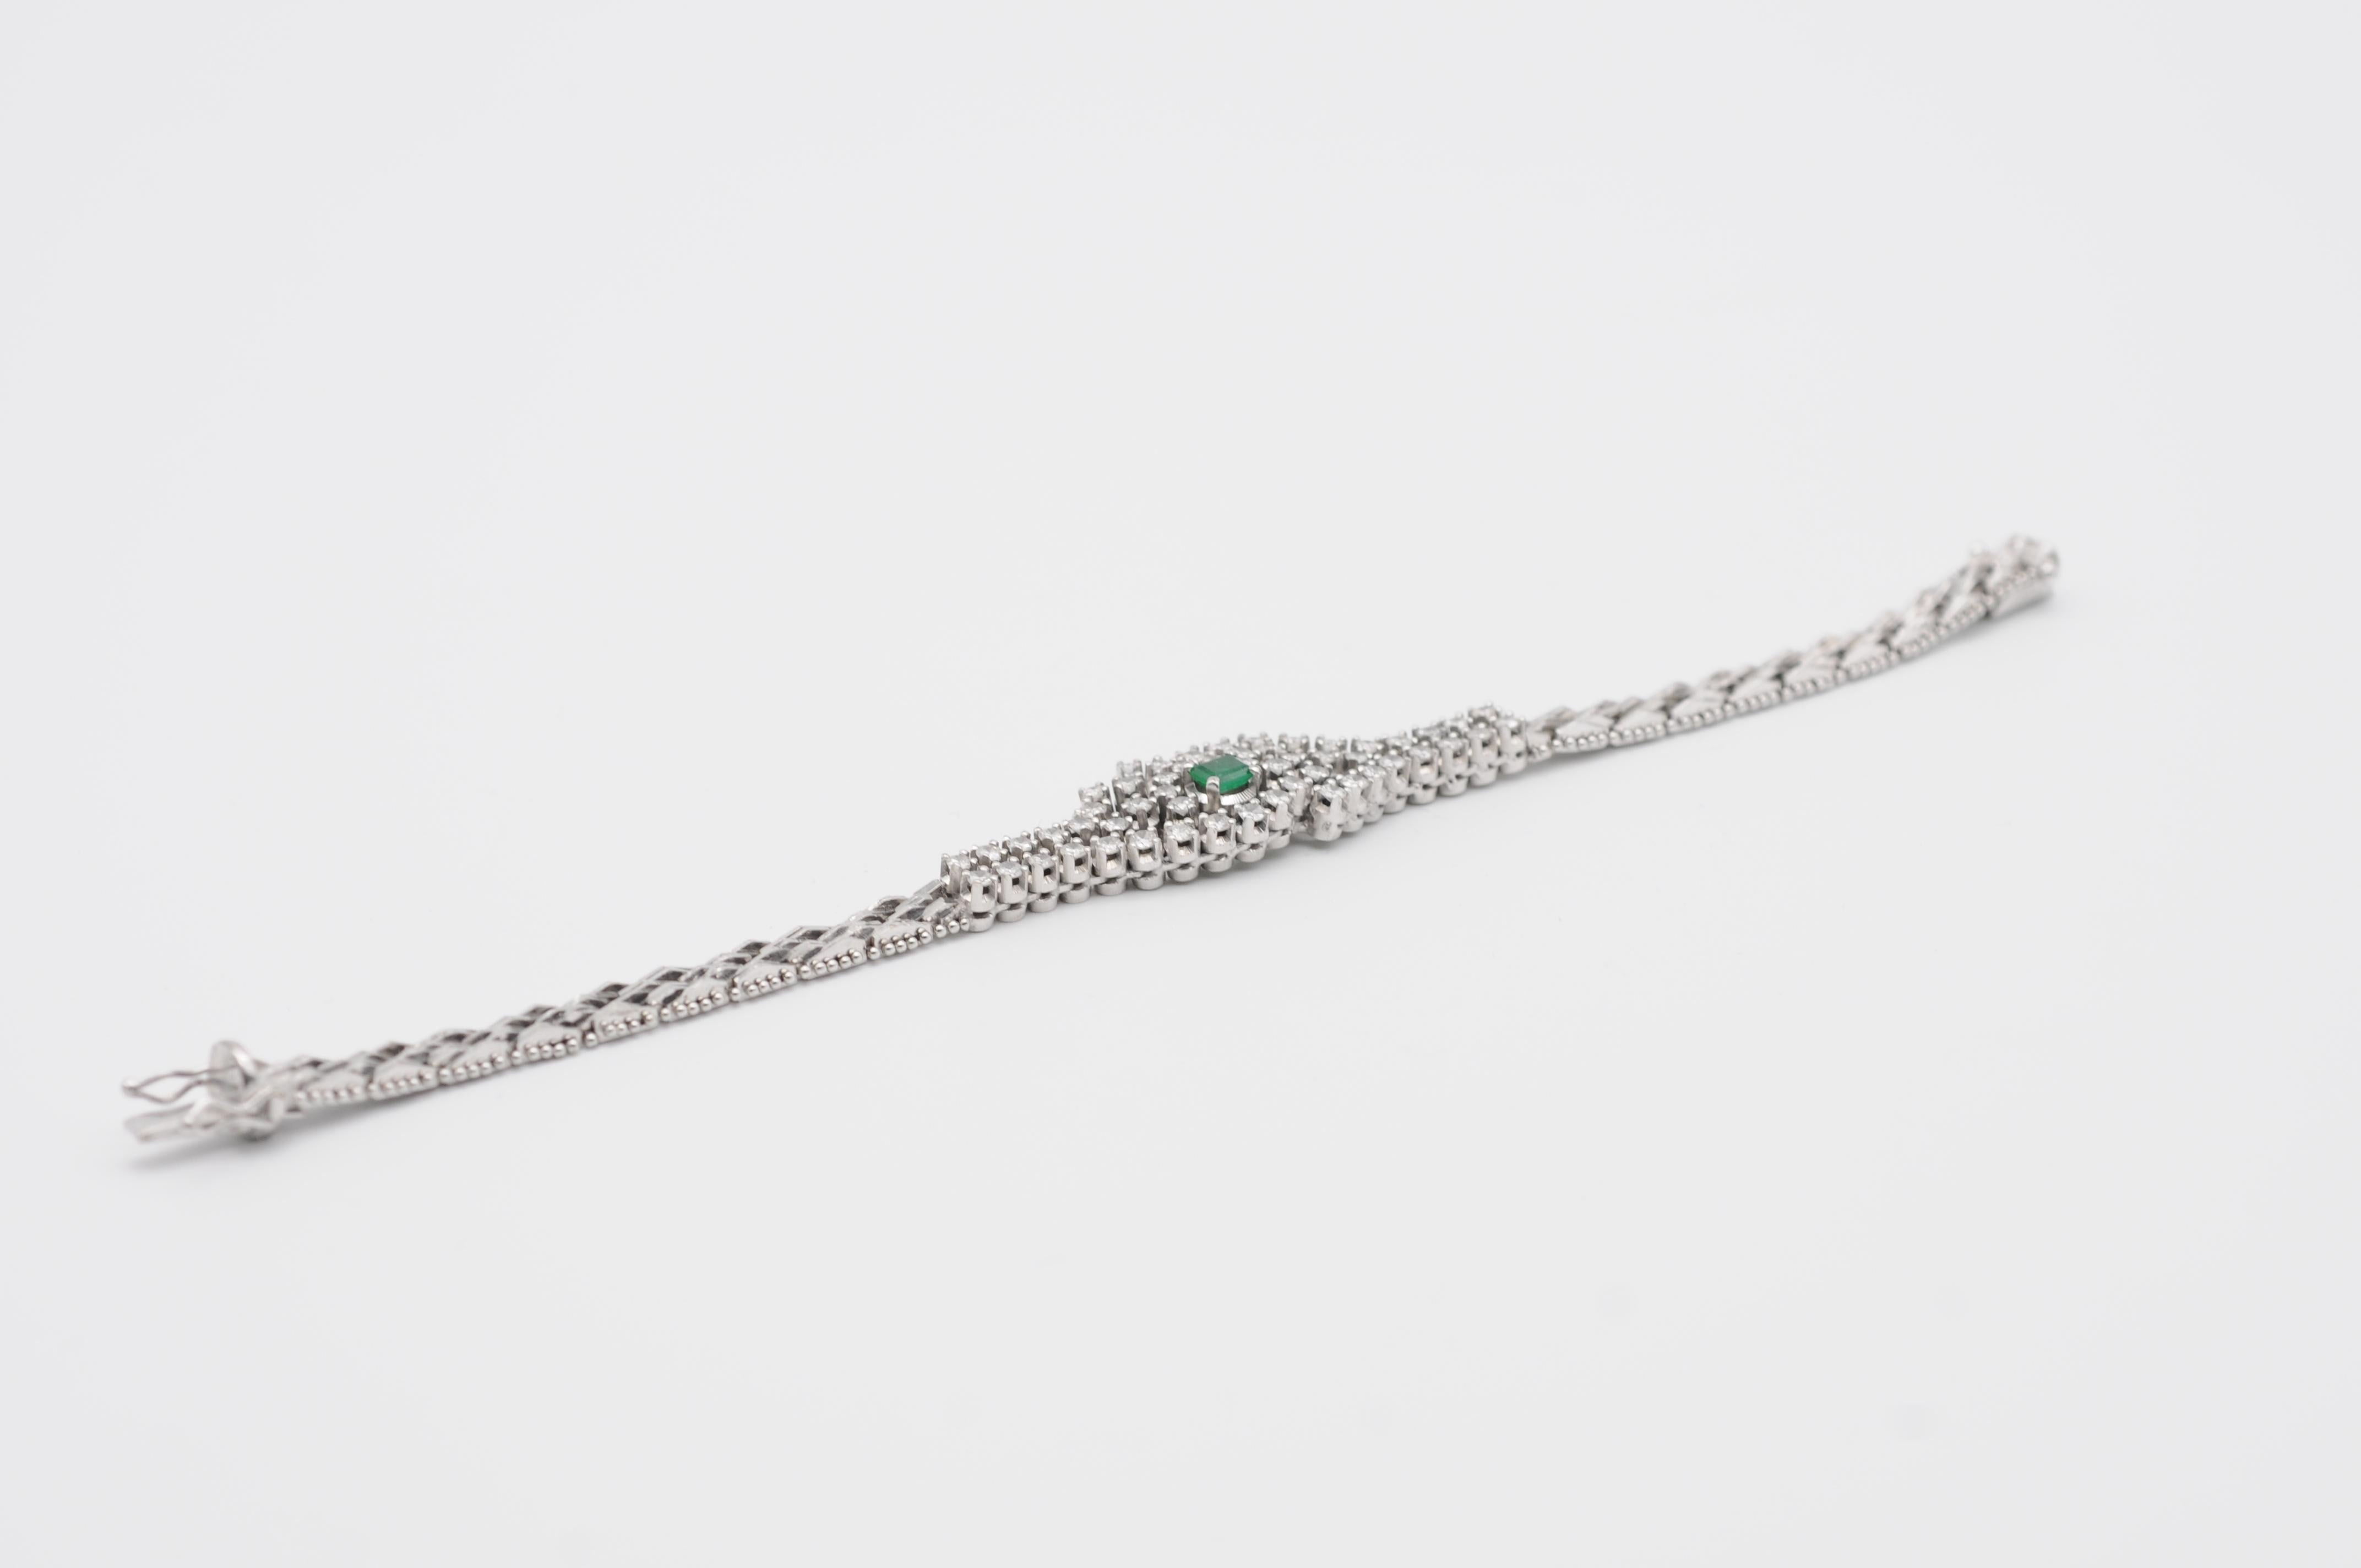 Sugarloaf Cabochon Art Deco Diamonds and  Emerald Bracelet in 18k White Gold  For Sale